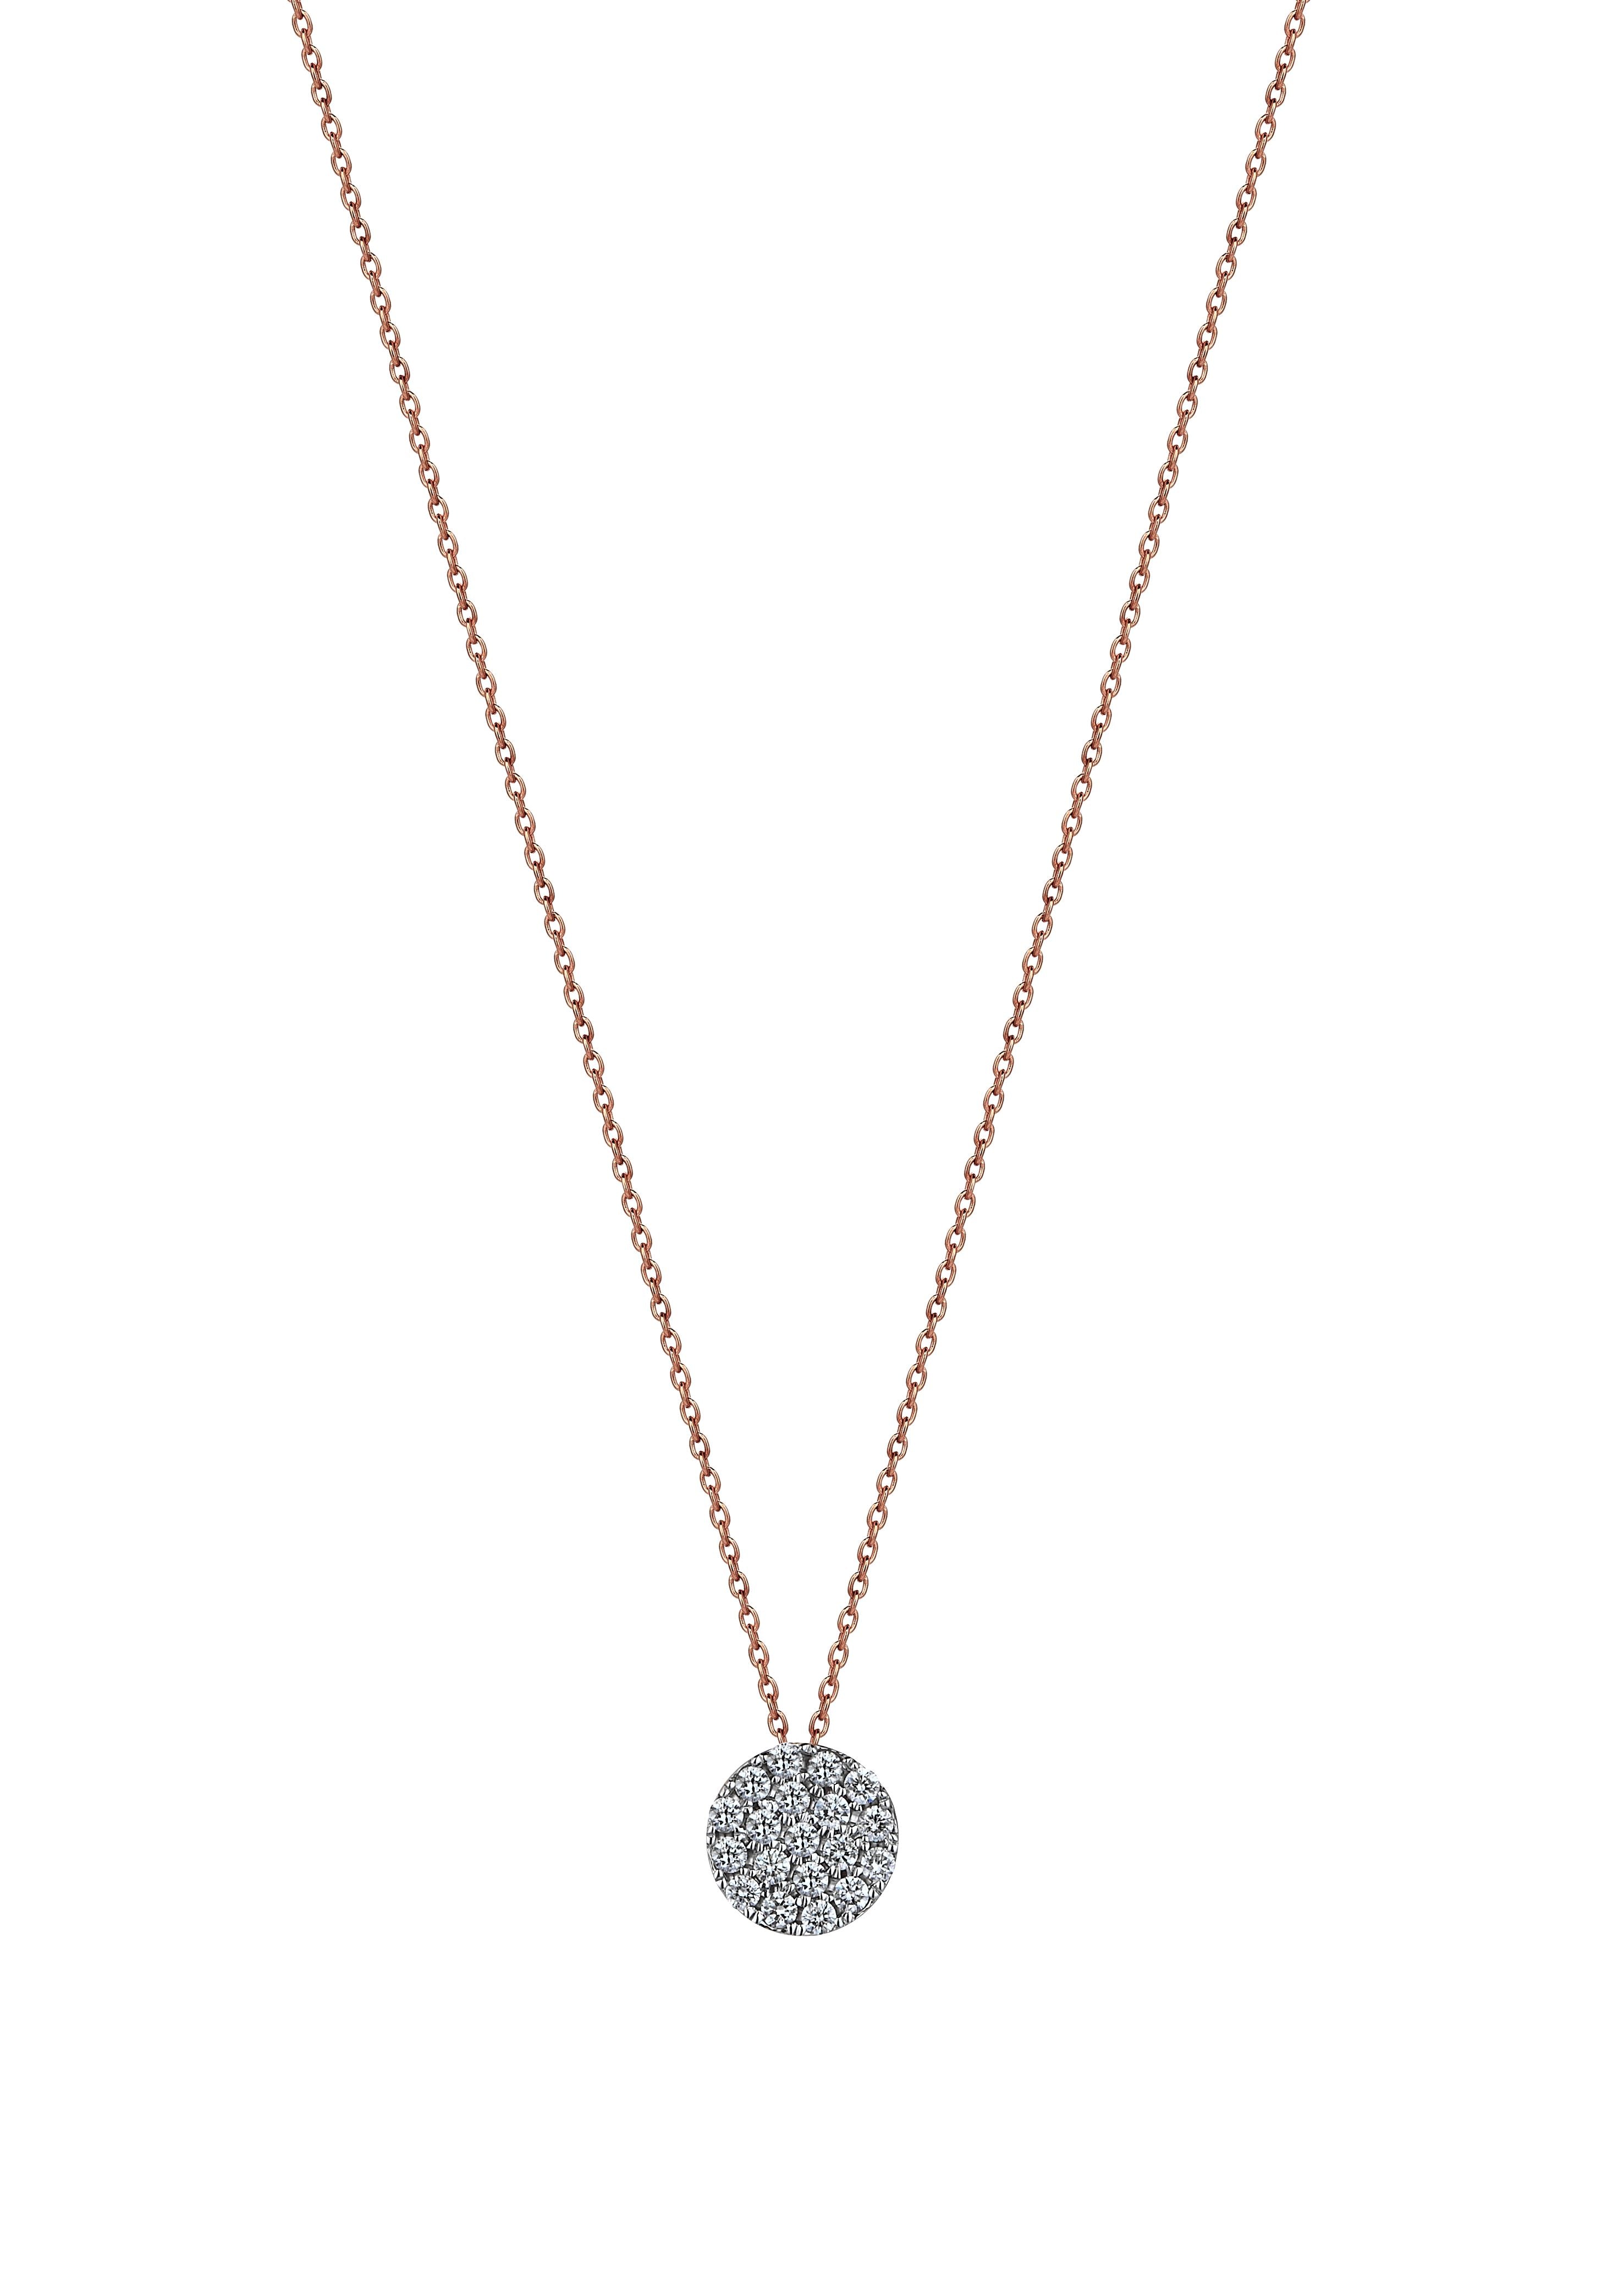 Pave Round Diamond Necklace in Rose Gold - Her Story Shop